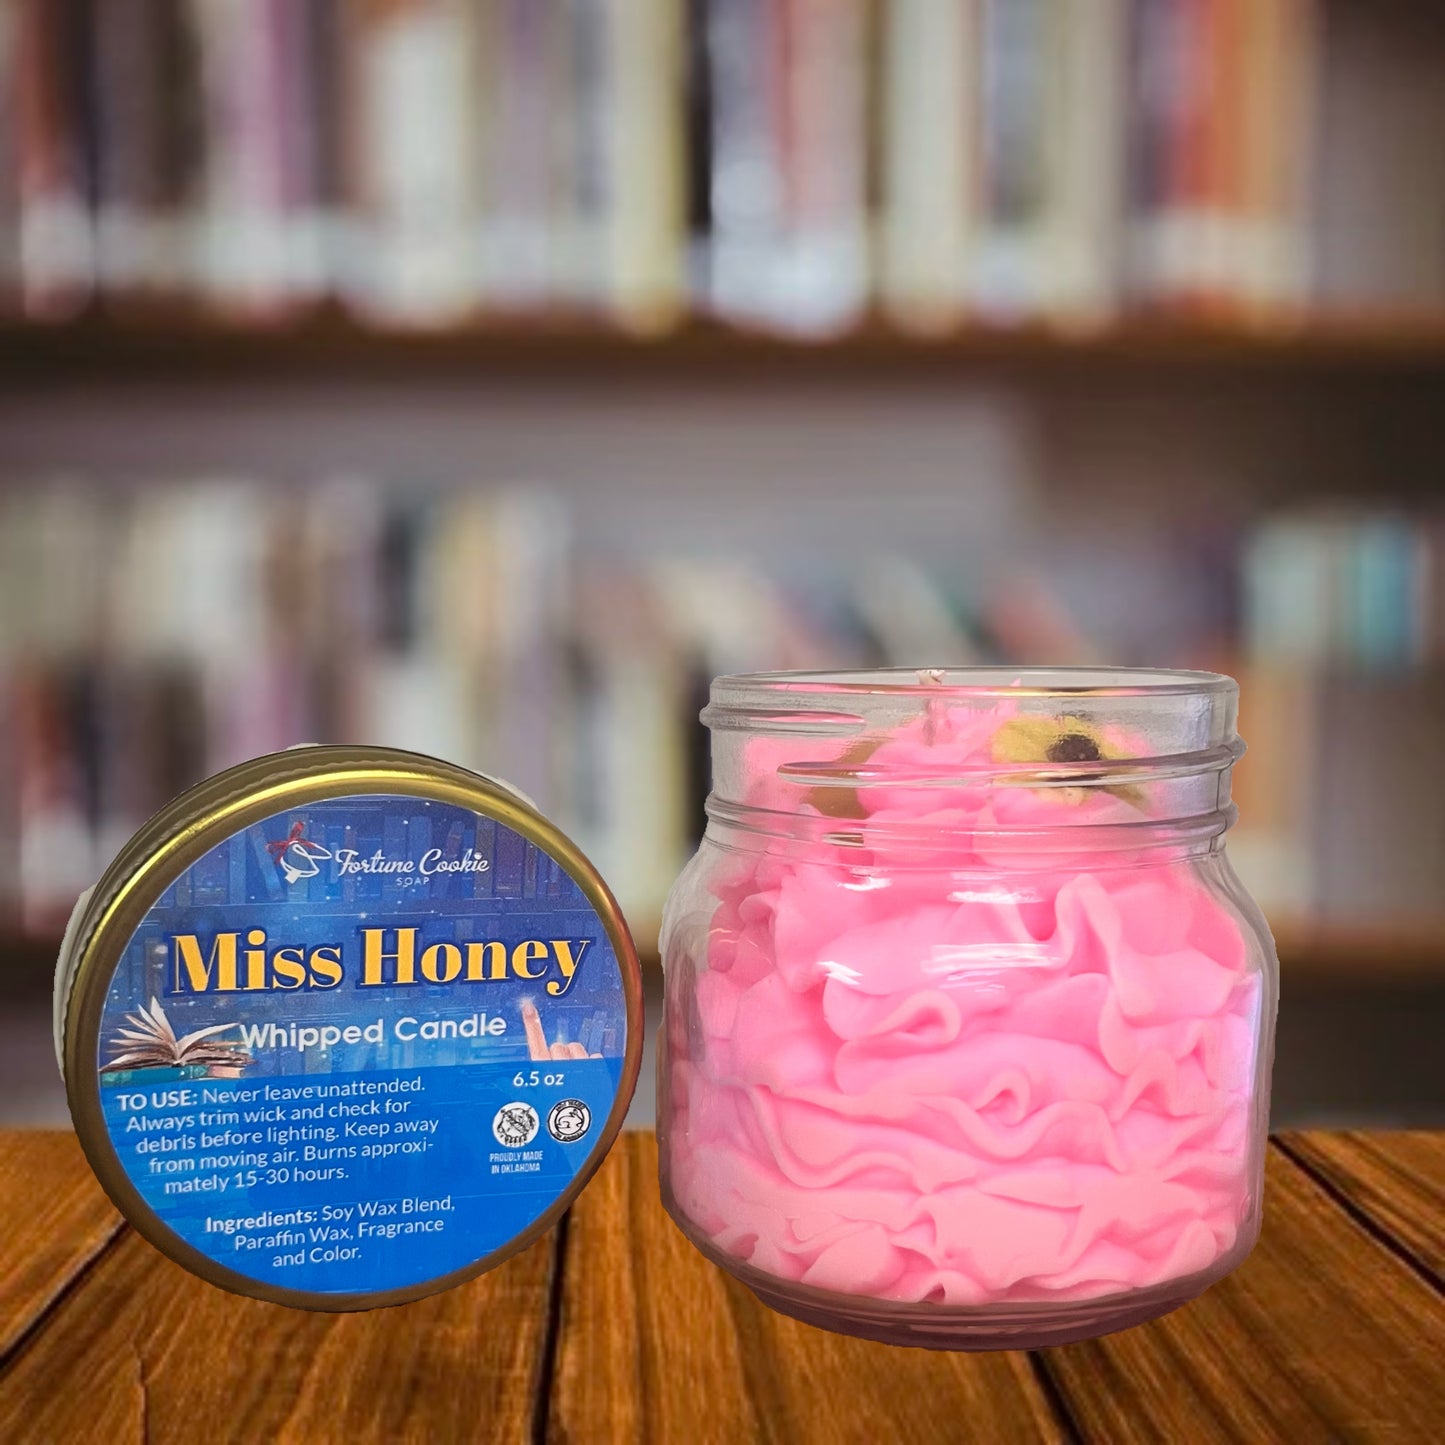 MISS HONEY Whipped Candle